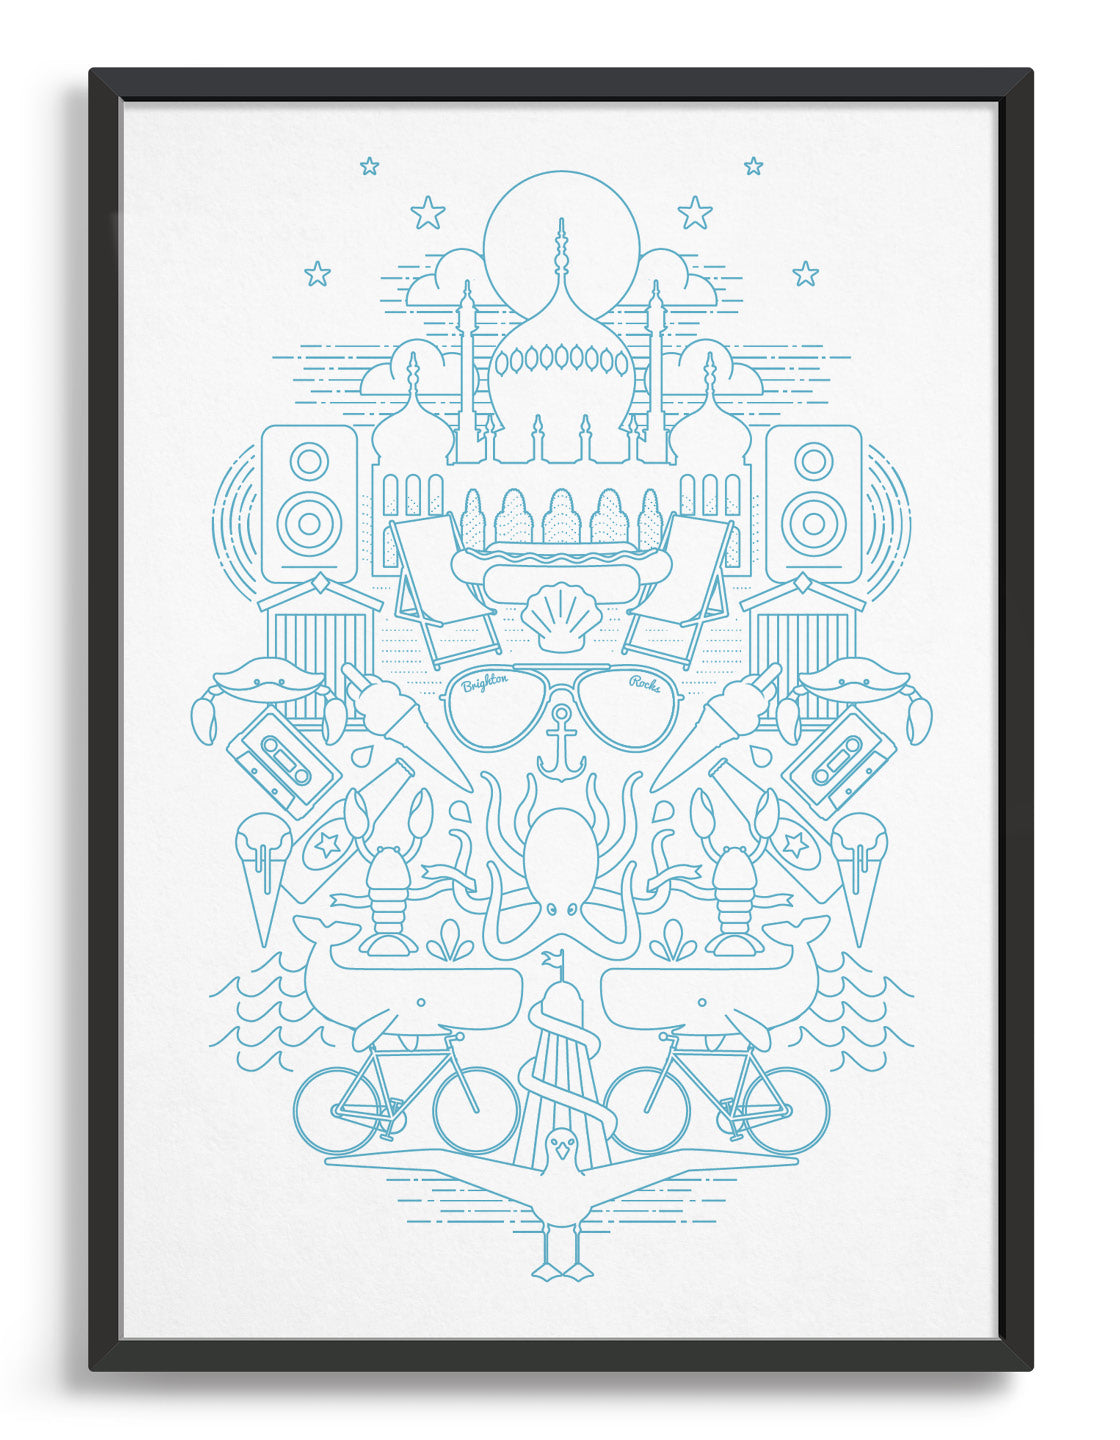 framed art print featuring Brighton illustrations including royal pavilion, sunglasses and seagulls in light blue